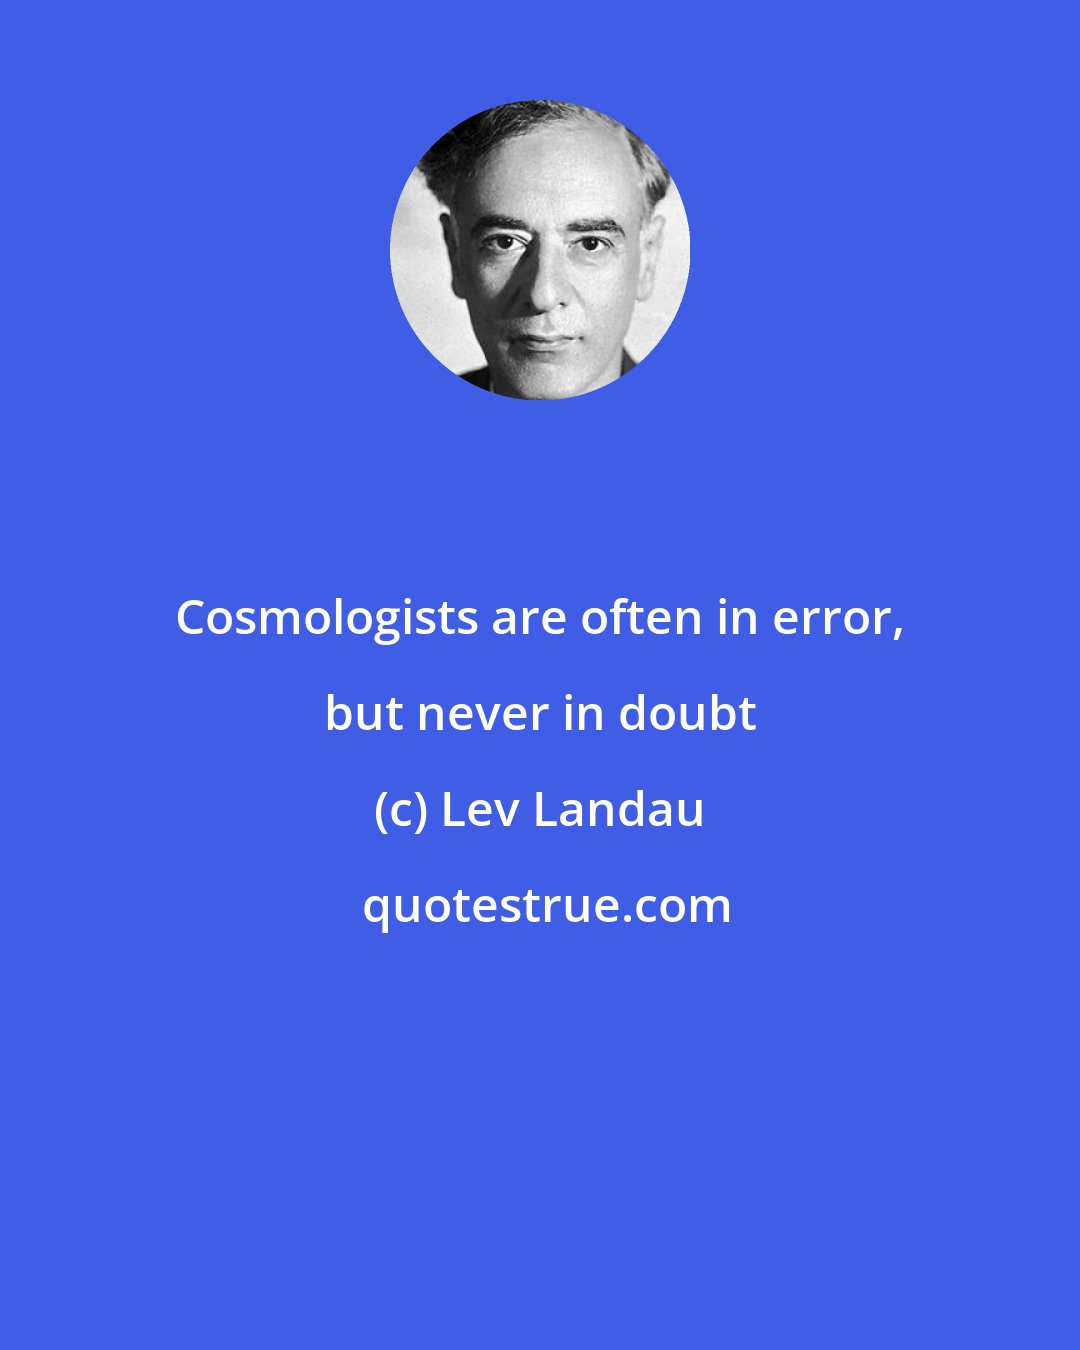 Lev Landau: Cosmologists are often in error, but never in doubt